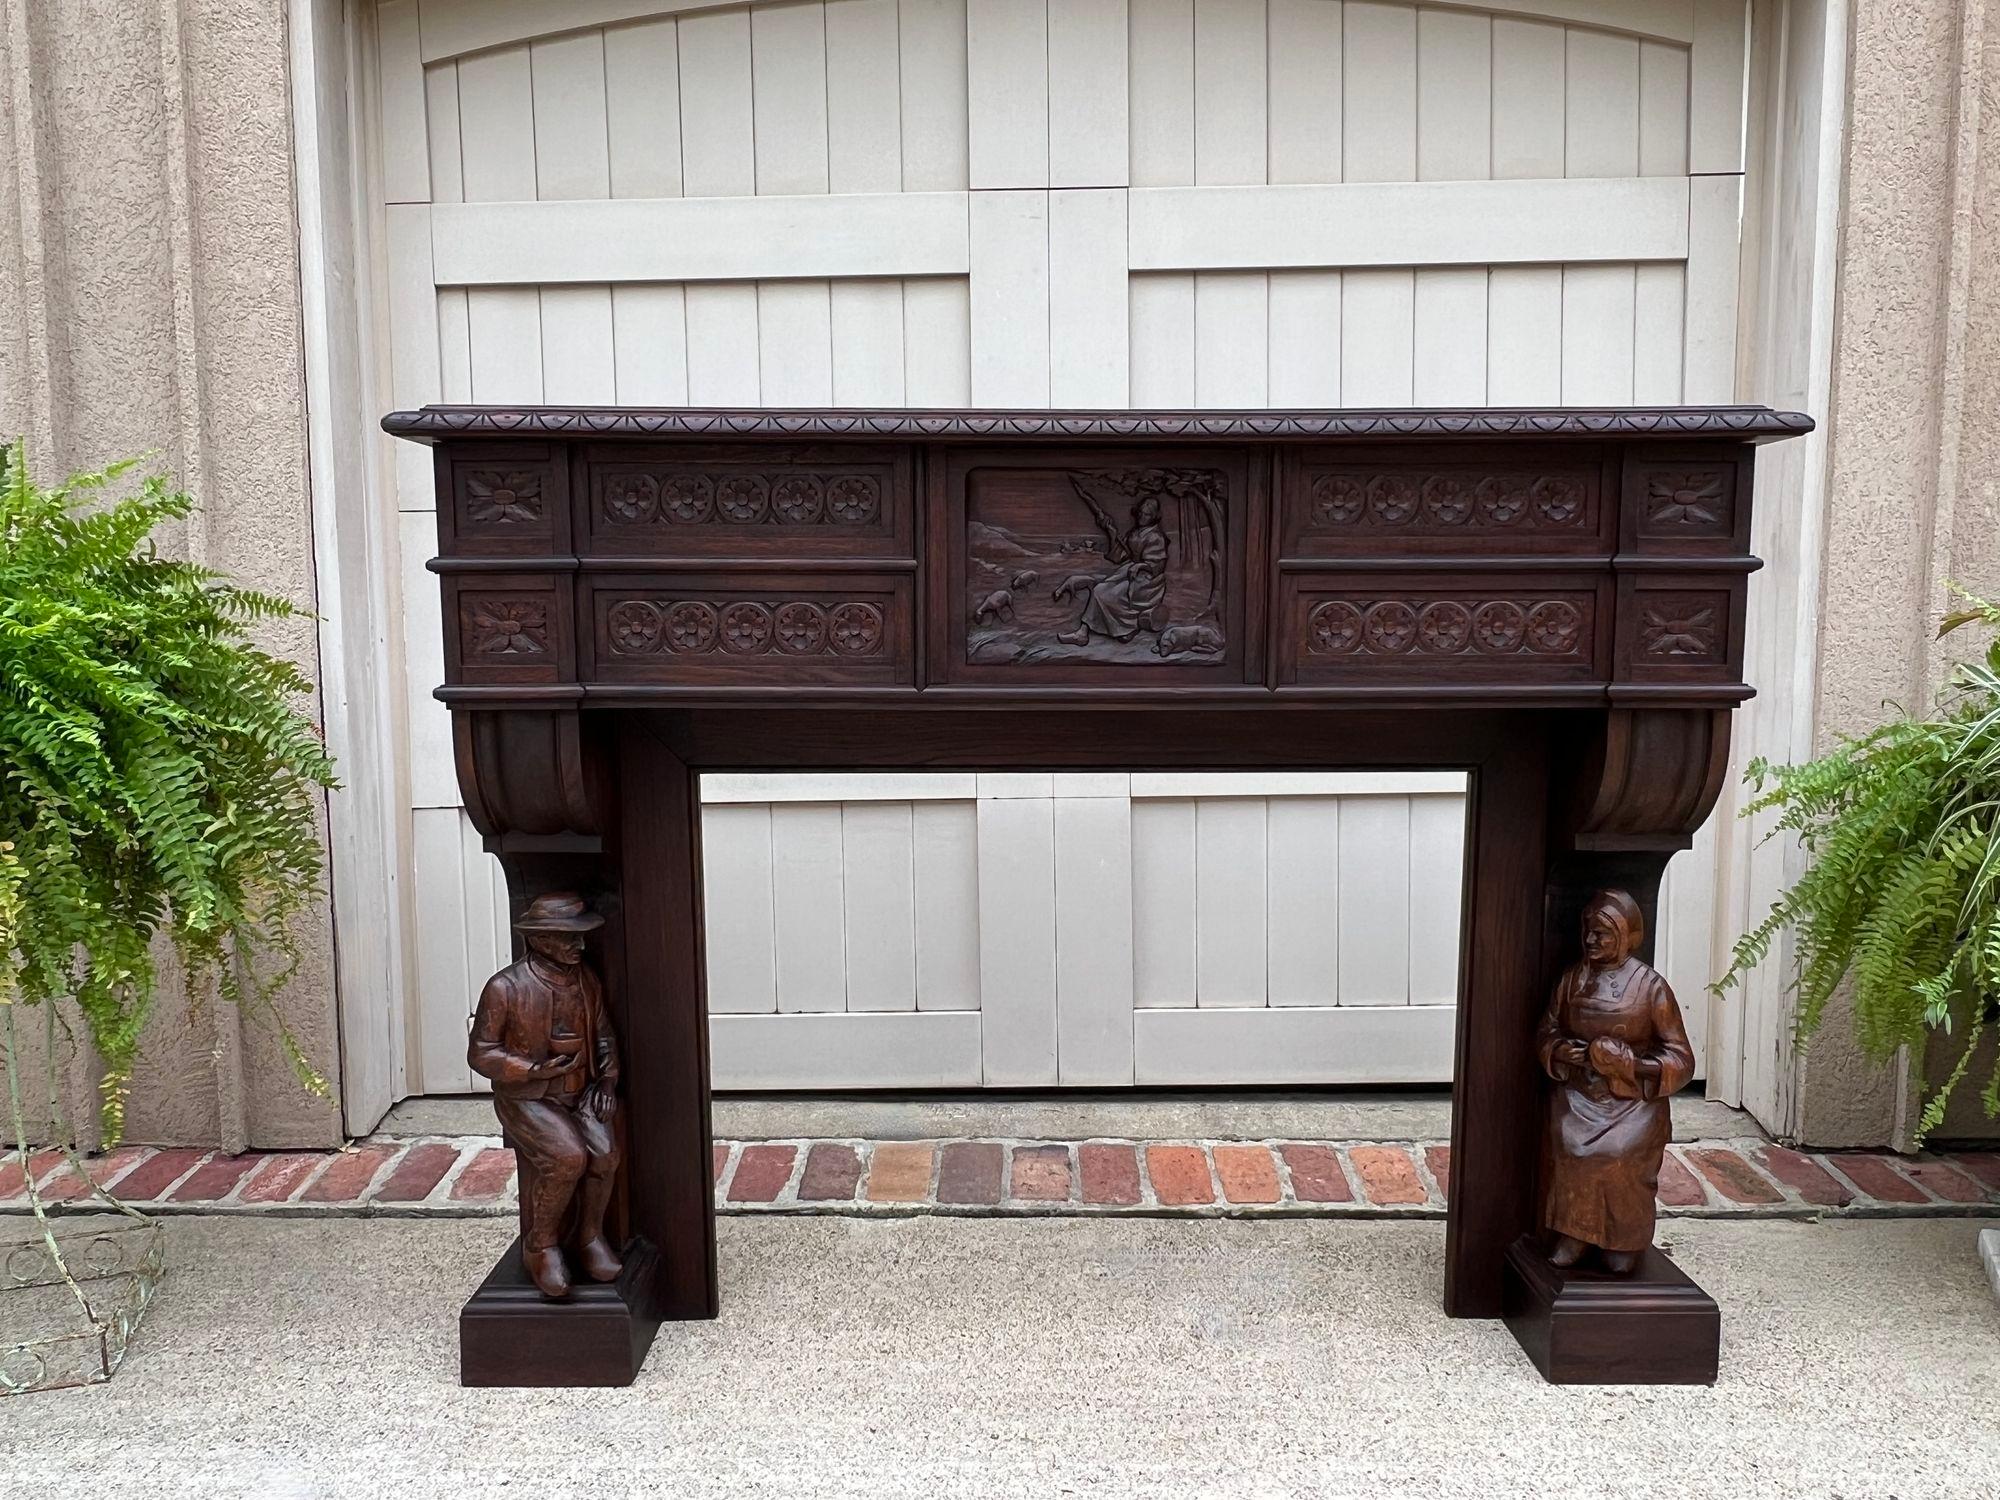 Antique French Mantel Fireplace Surround Breton Brittany Carved Dark Oak .

Direct from France, this gorgeous statement piece will add elegance and distinction to any home and is well suited for either new construction or a remodel.

Originating